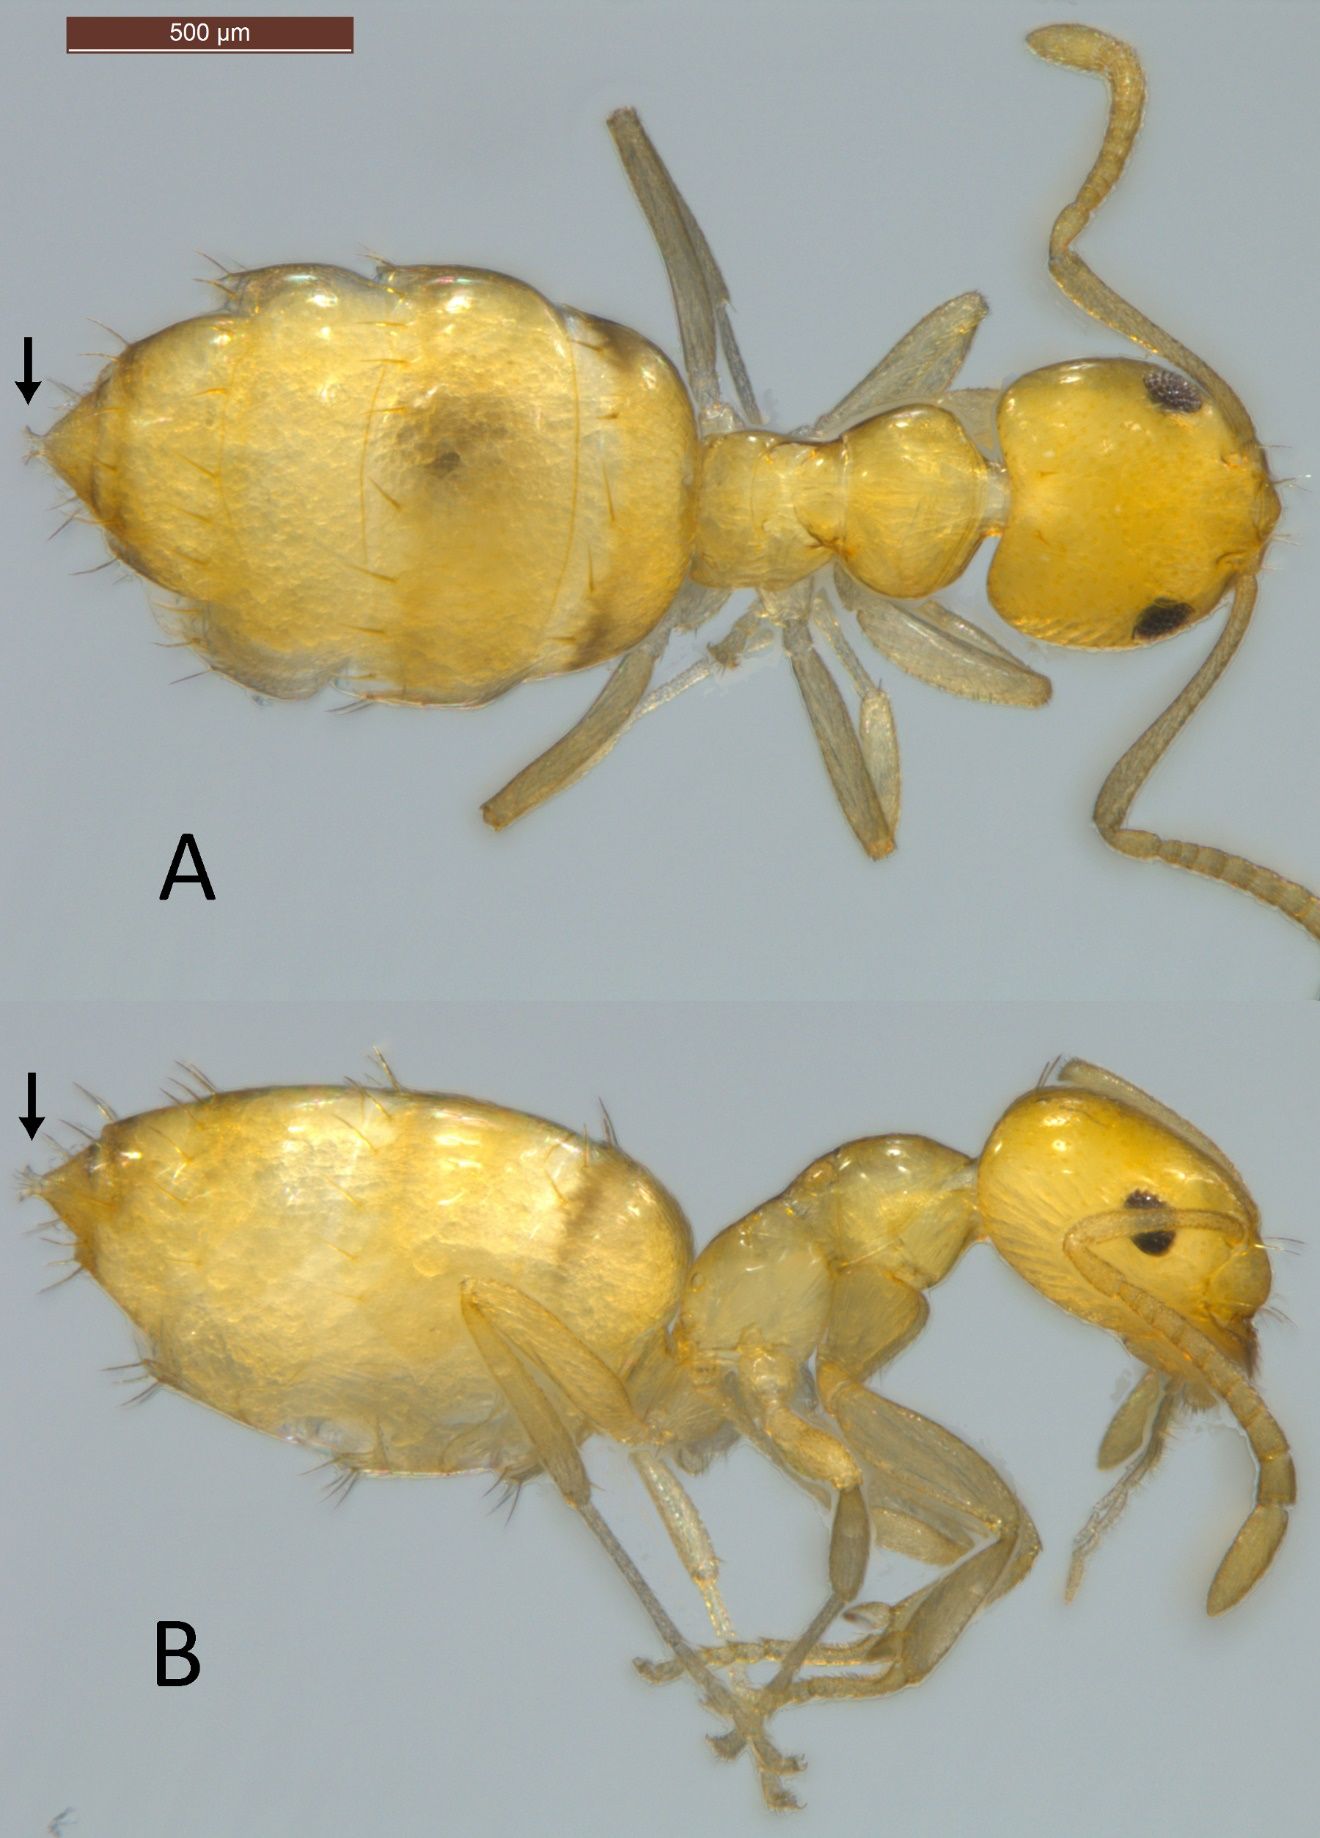 Plagiolepis alluaudi Emery worker. A: dorsal view, B: lateral view. Arrows indicate the acidopore. 